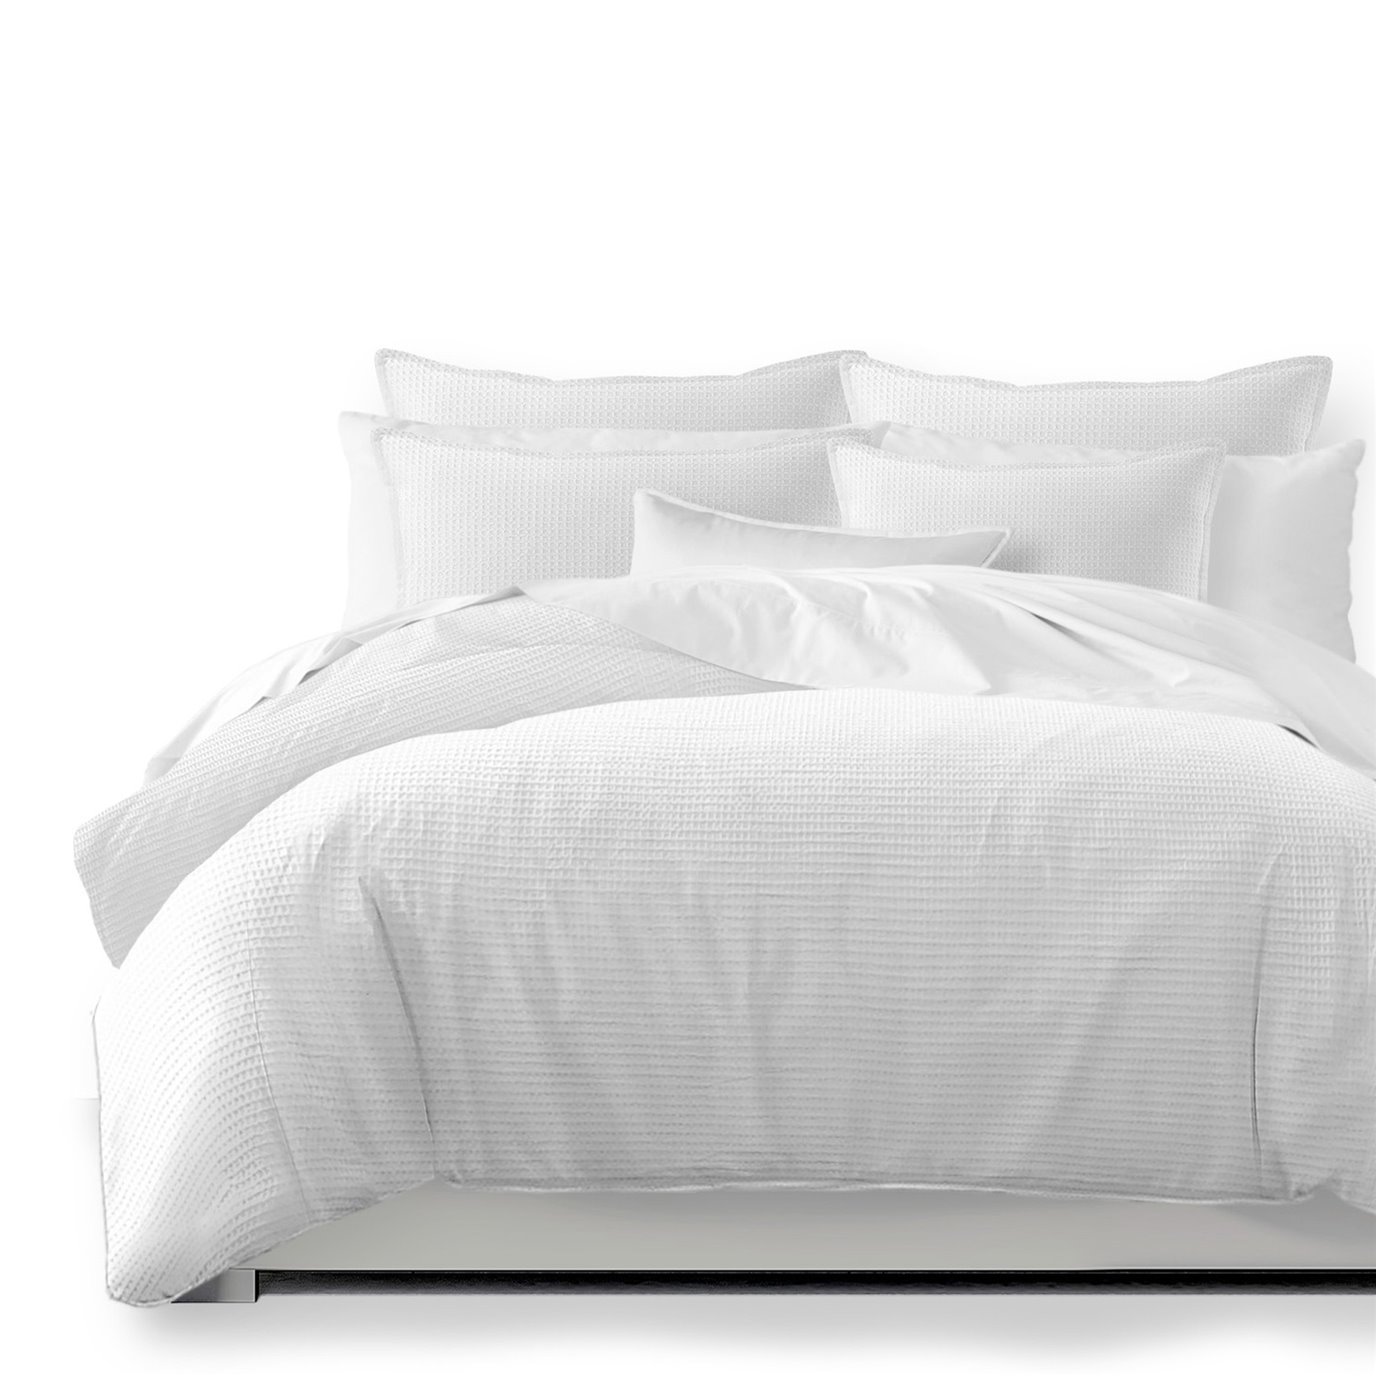 Classic Waffle White Comforter and Pillow Sham(s) Set - Size Super Queen